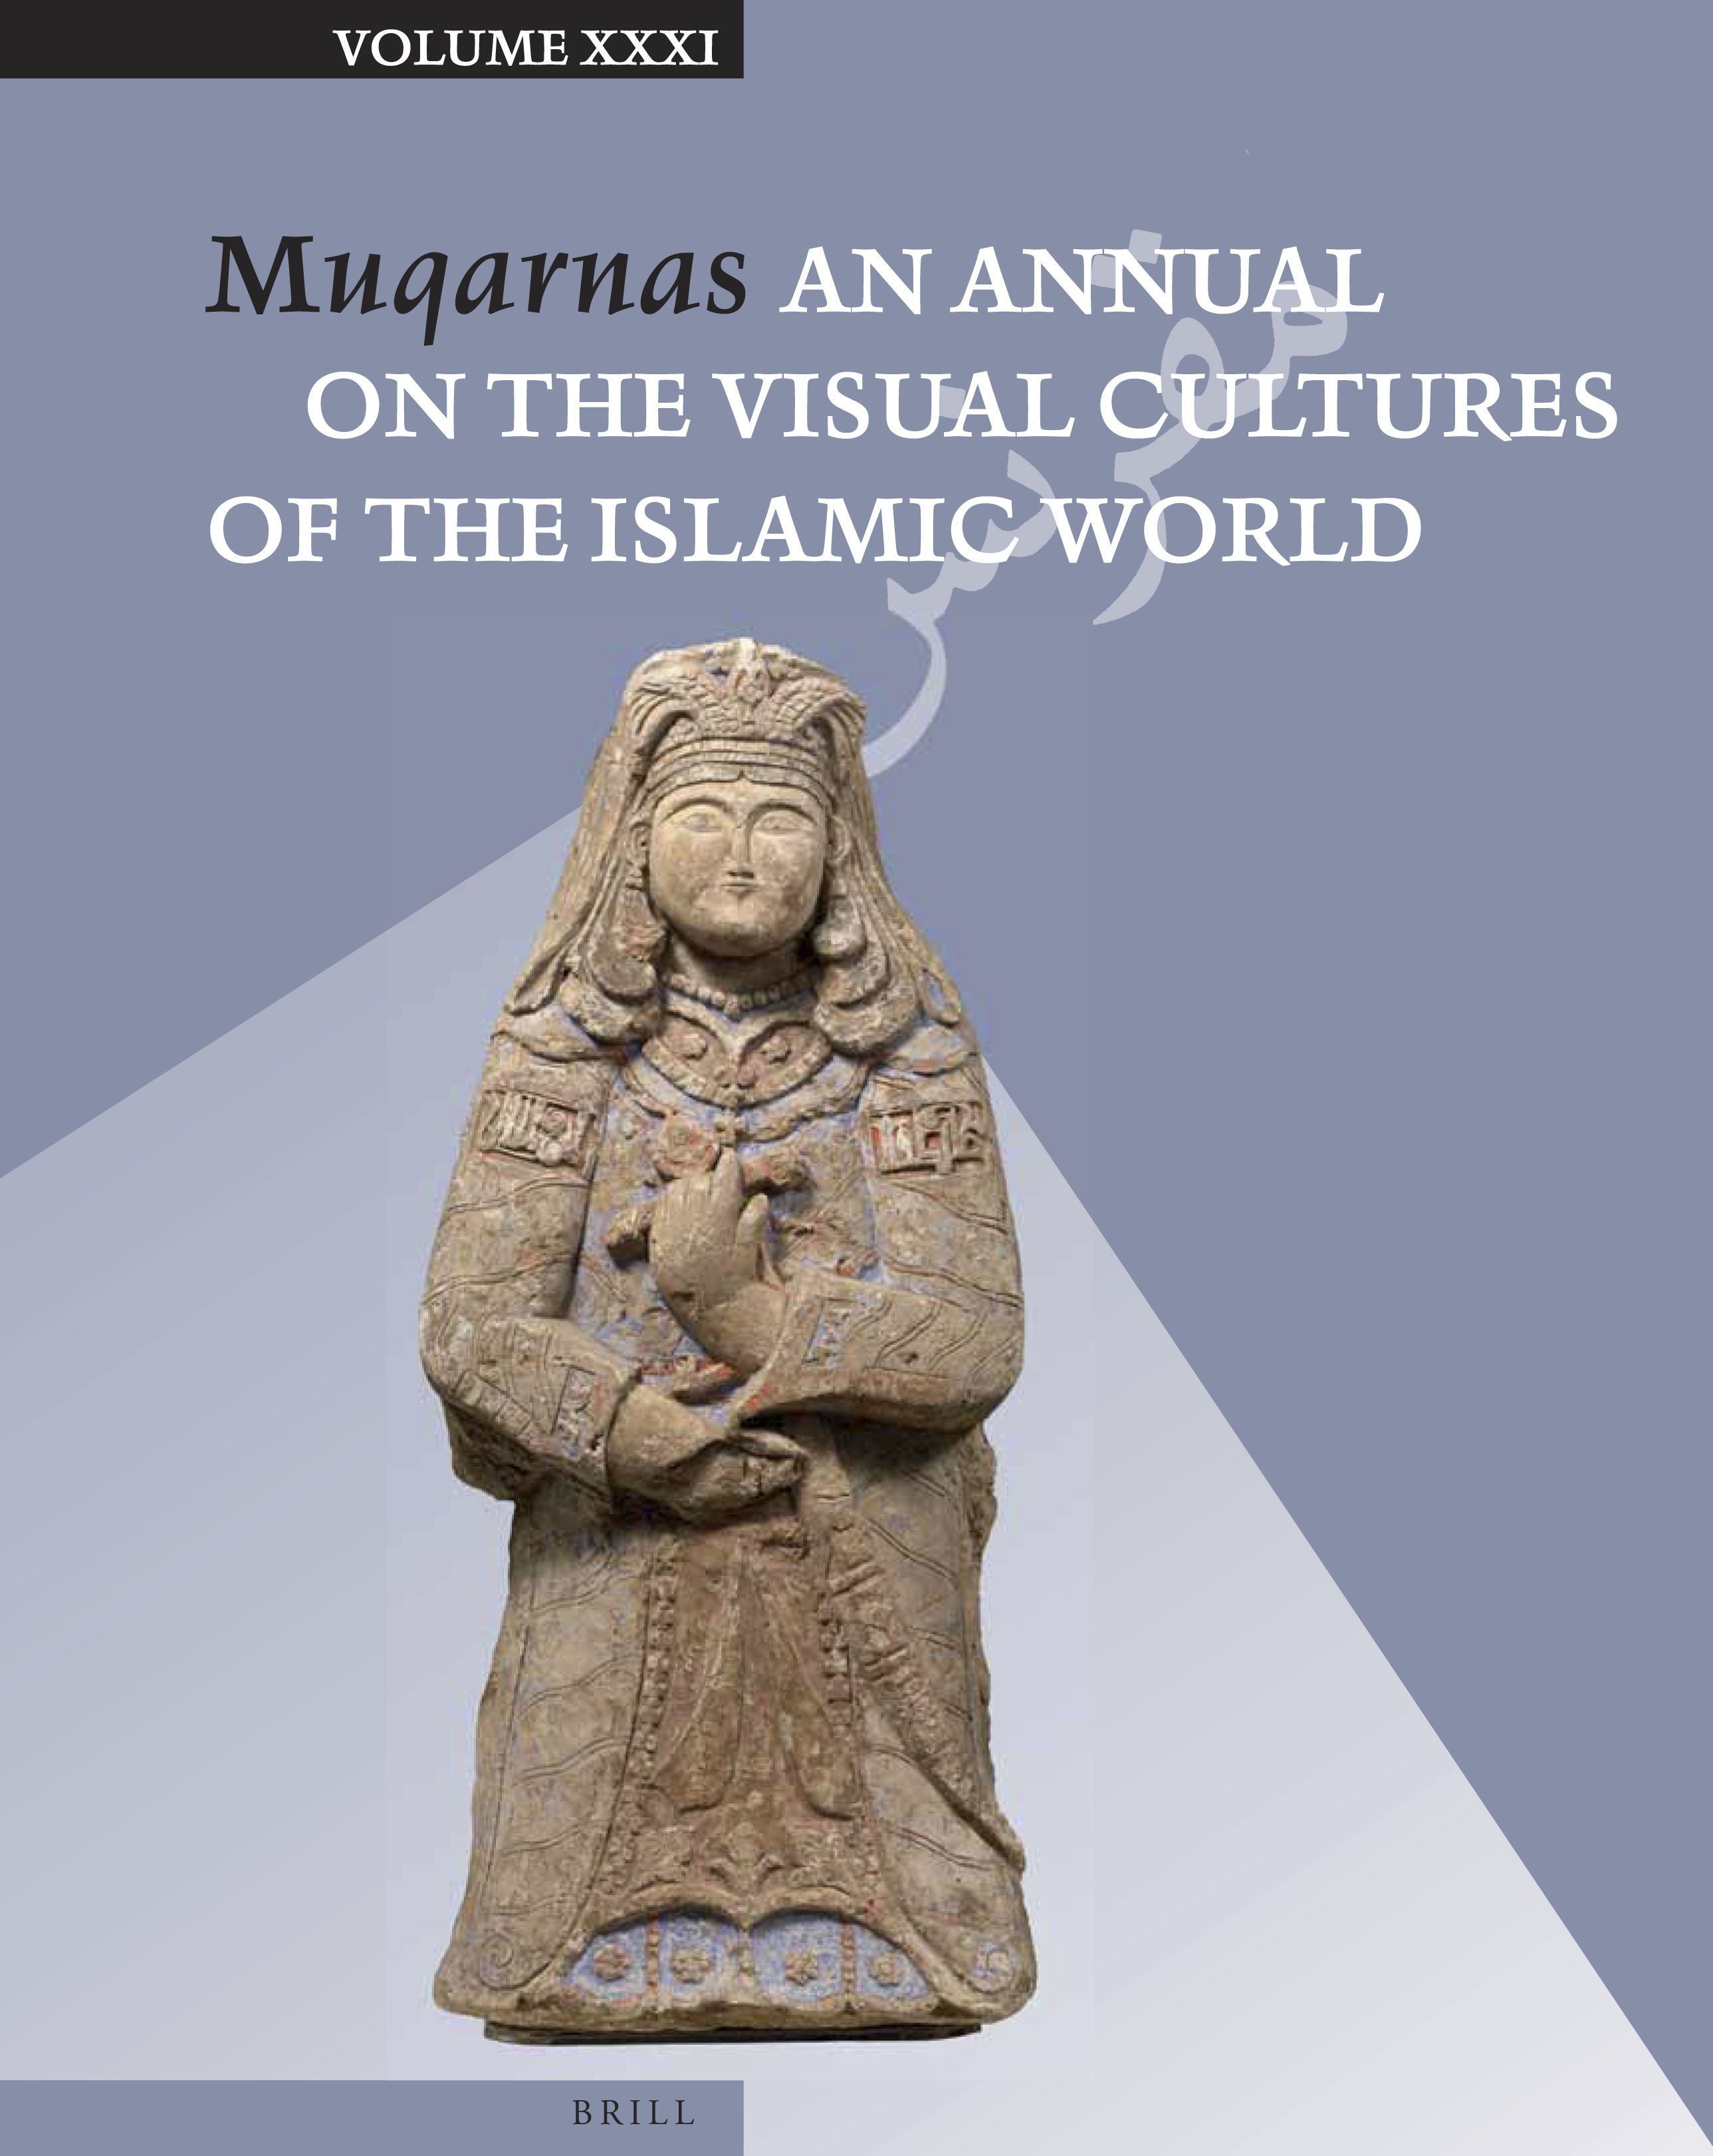 Muqarnas Volume XXXI: An Annual on the Visual Cultures of the Islamic World